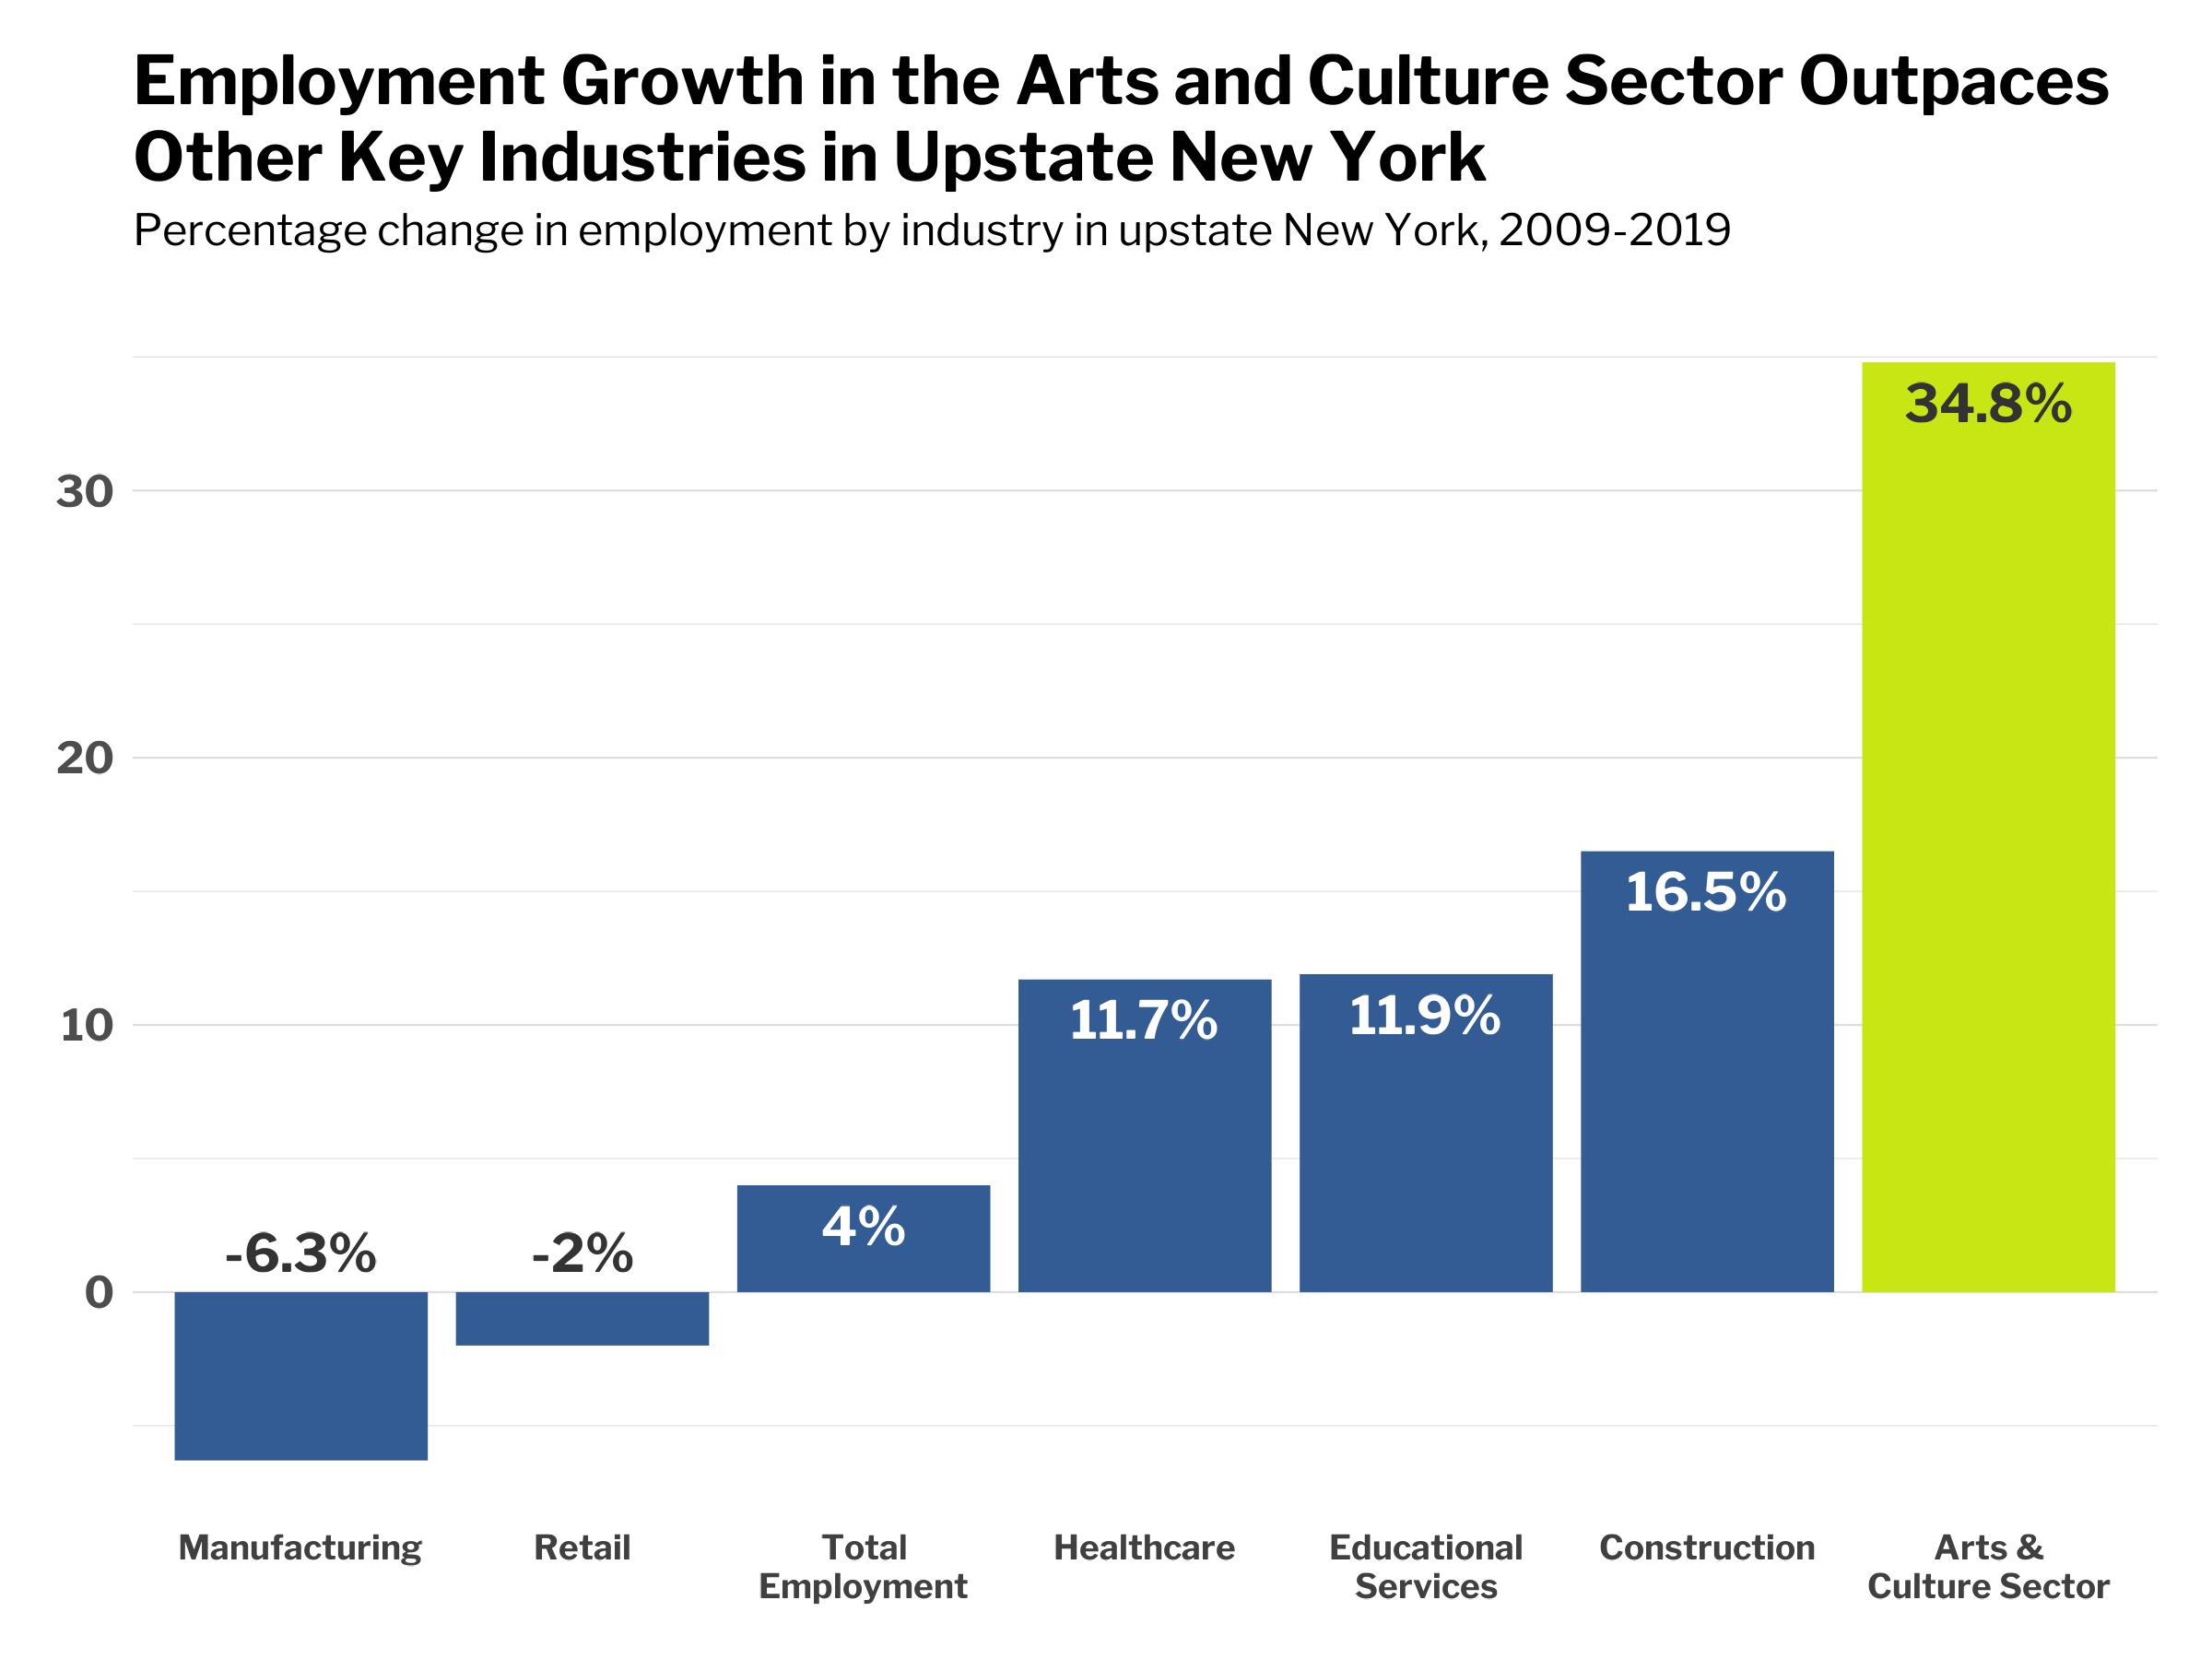 Bar chart titled, Employment Growth in the Arts and Culture Sector Outpaces Other Key Industries in Upstate New York. The subtitle reads, Percentage of employment growth by industry, 2009–2019. The chart reads, -6.3% for manufacturing. -2%, retail. 4%, Total Employment. 11.7%, Healthcare. 11.9%, Educational Services. 16.5%, Construction. 34.8%, Arts & Culture Sector.